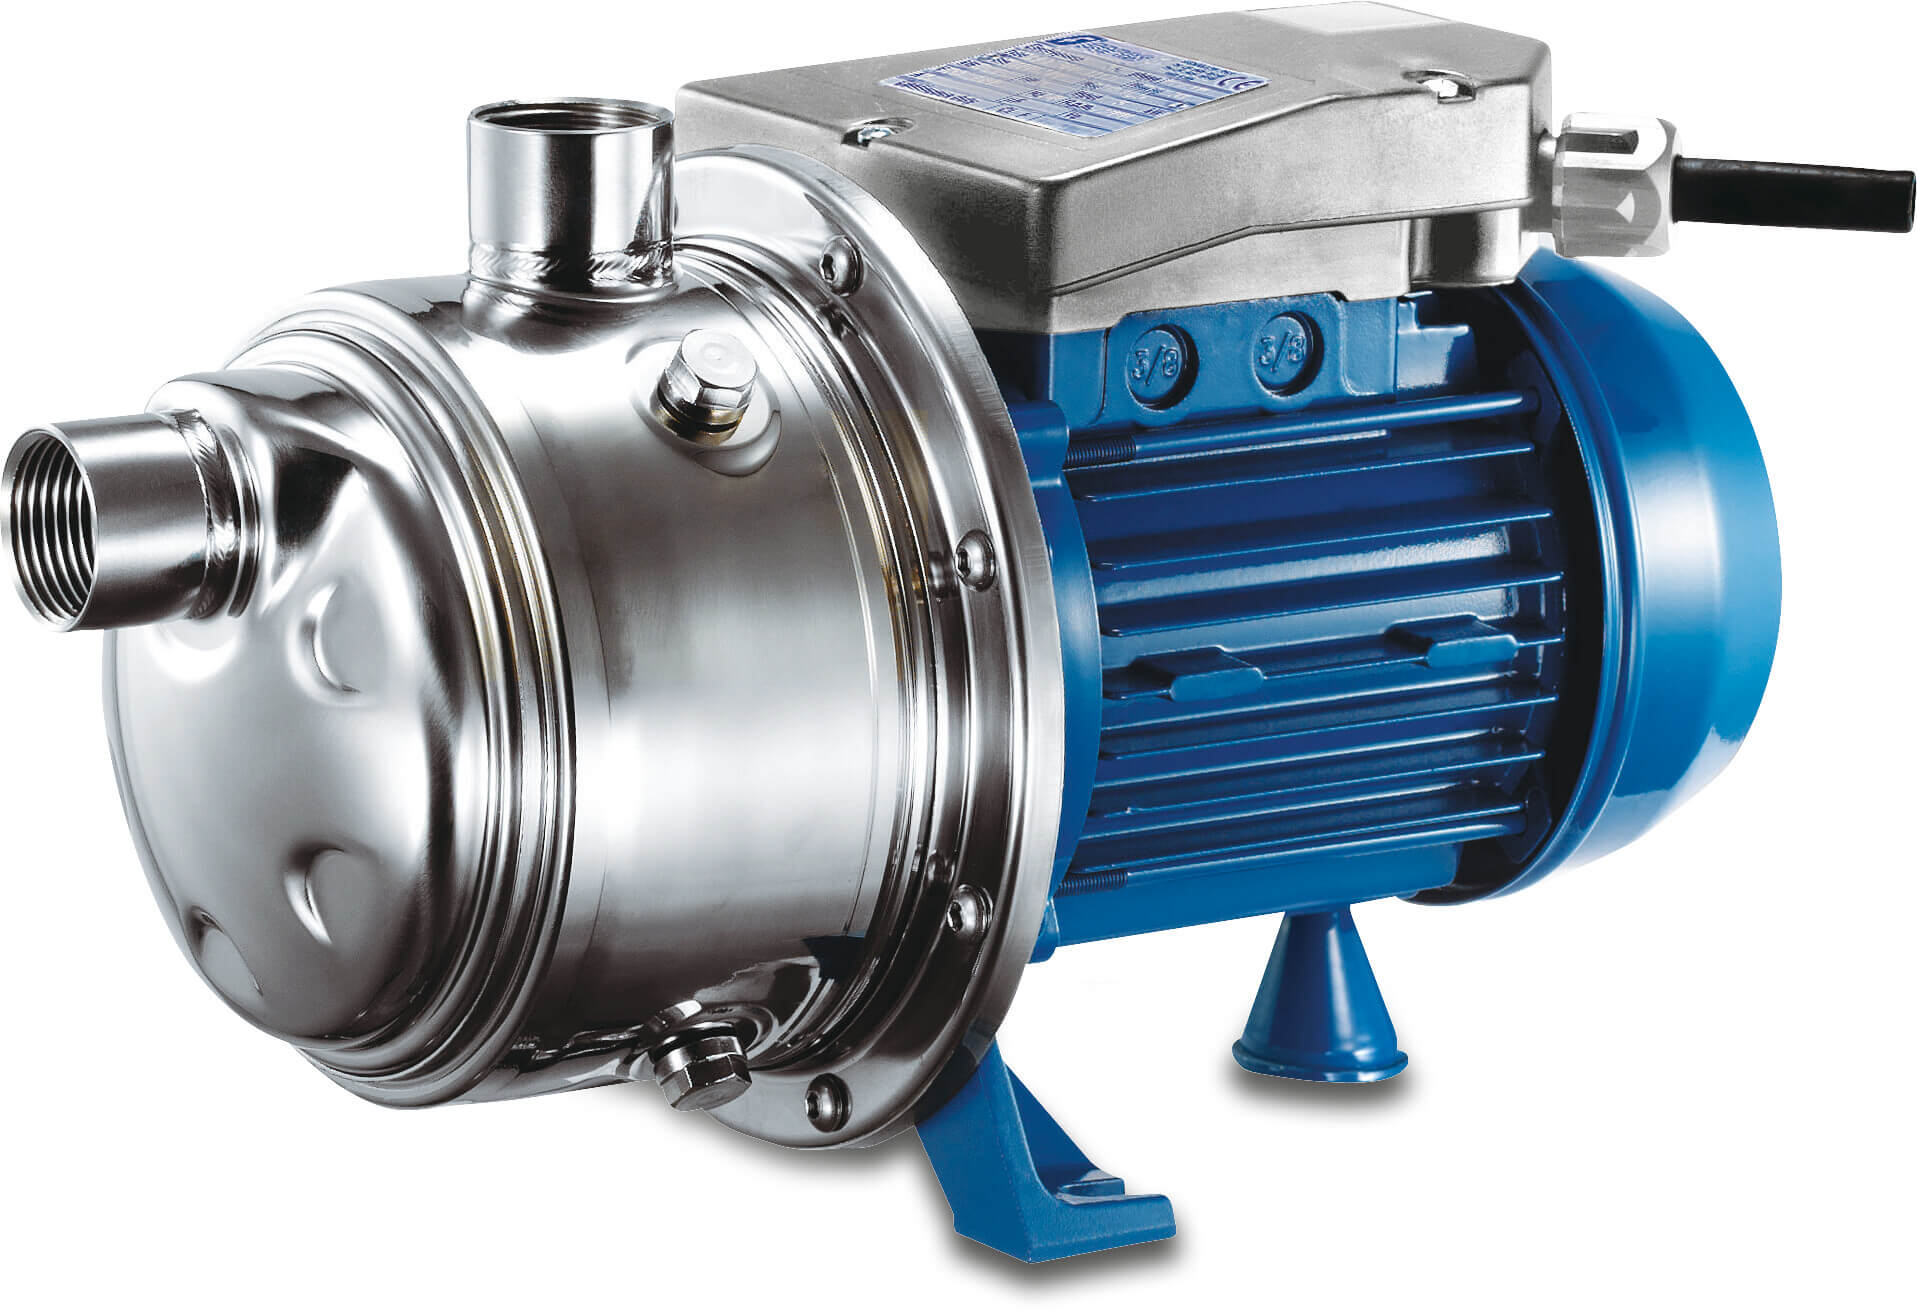 Foras Multi-stage centrifugal pump stainless steel 304 1" female thread 8,5bar 4,8A 230VAC blue type P 3S-100/5 M